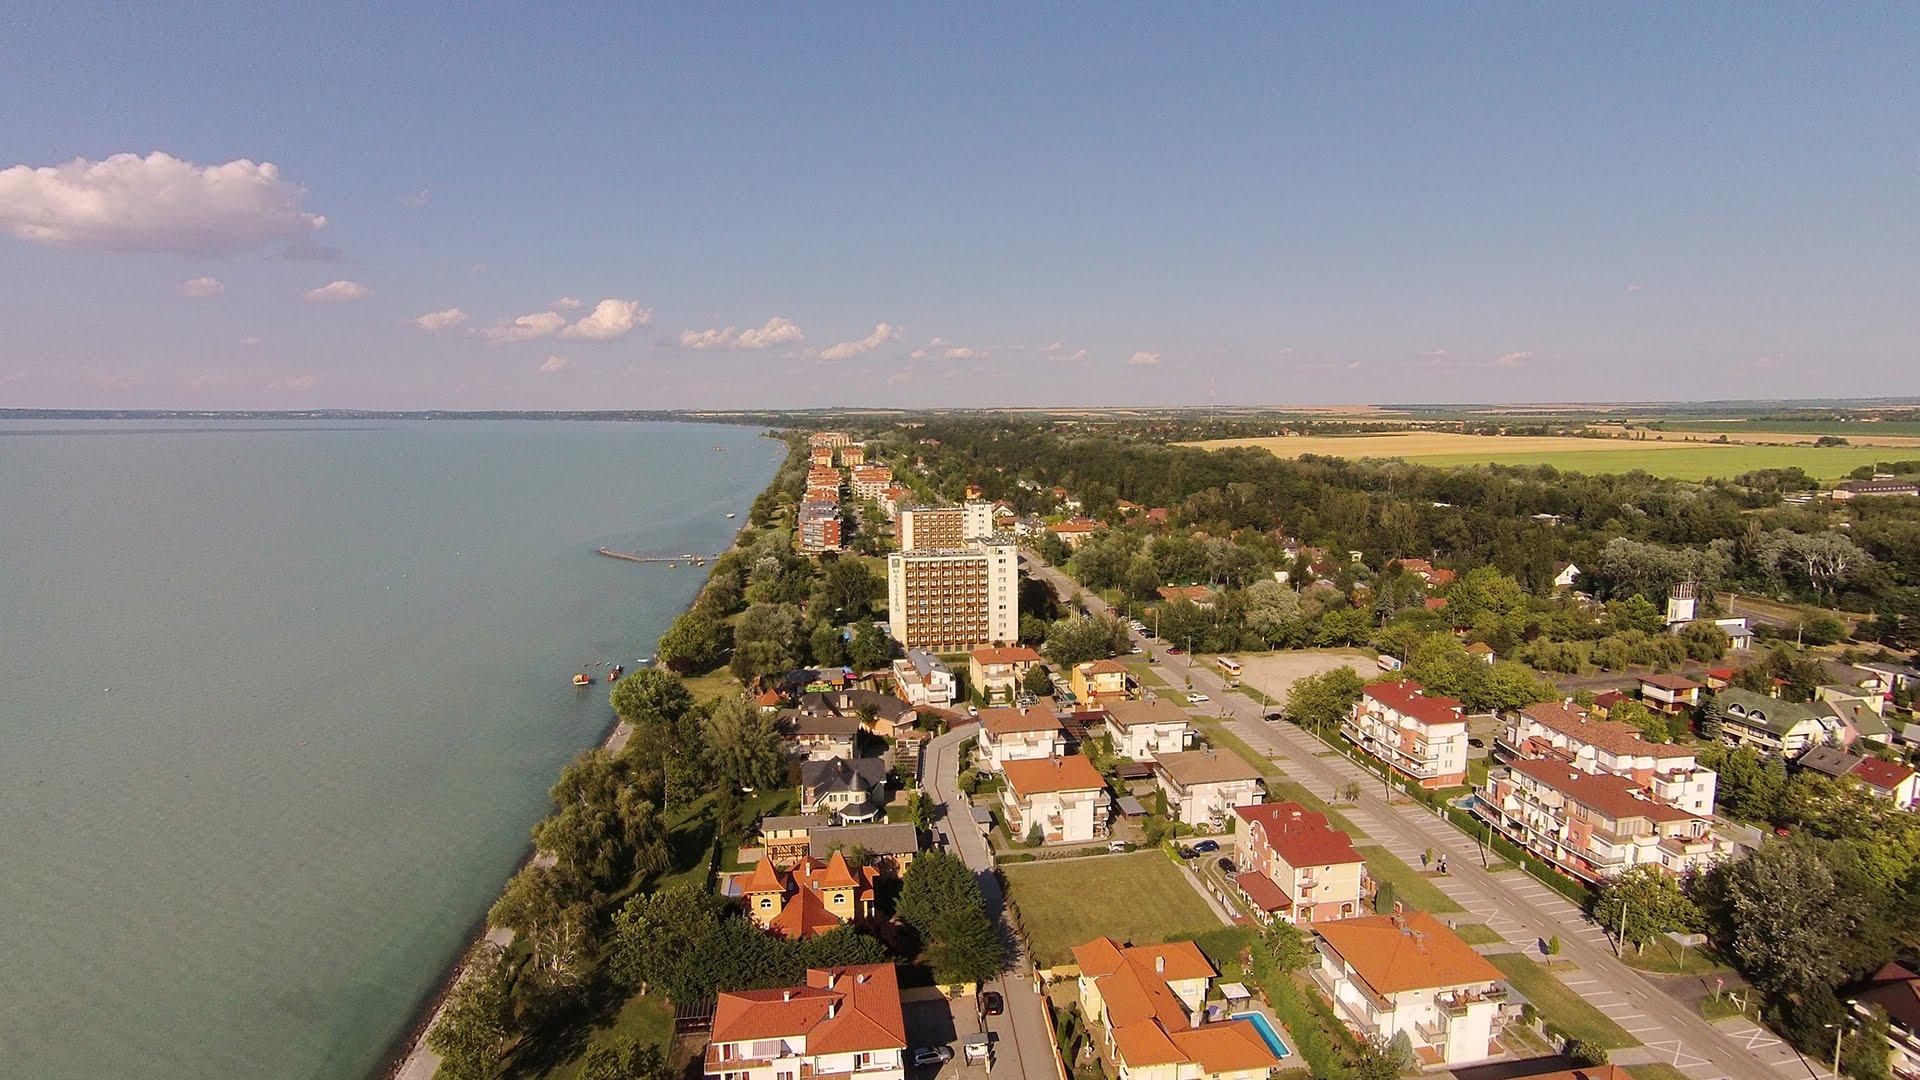 Siófok Welcomes Families, Not Partiers